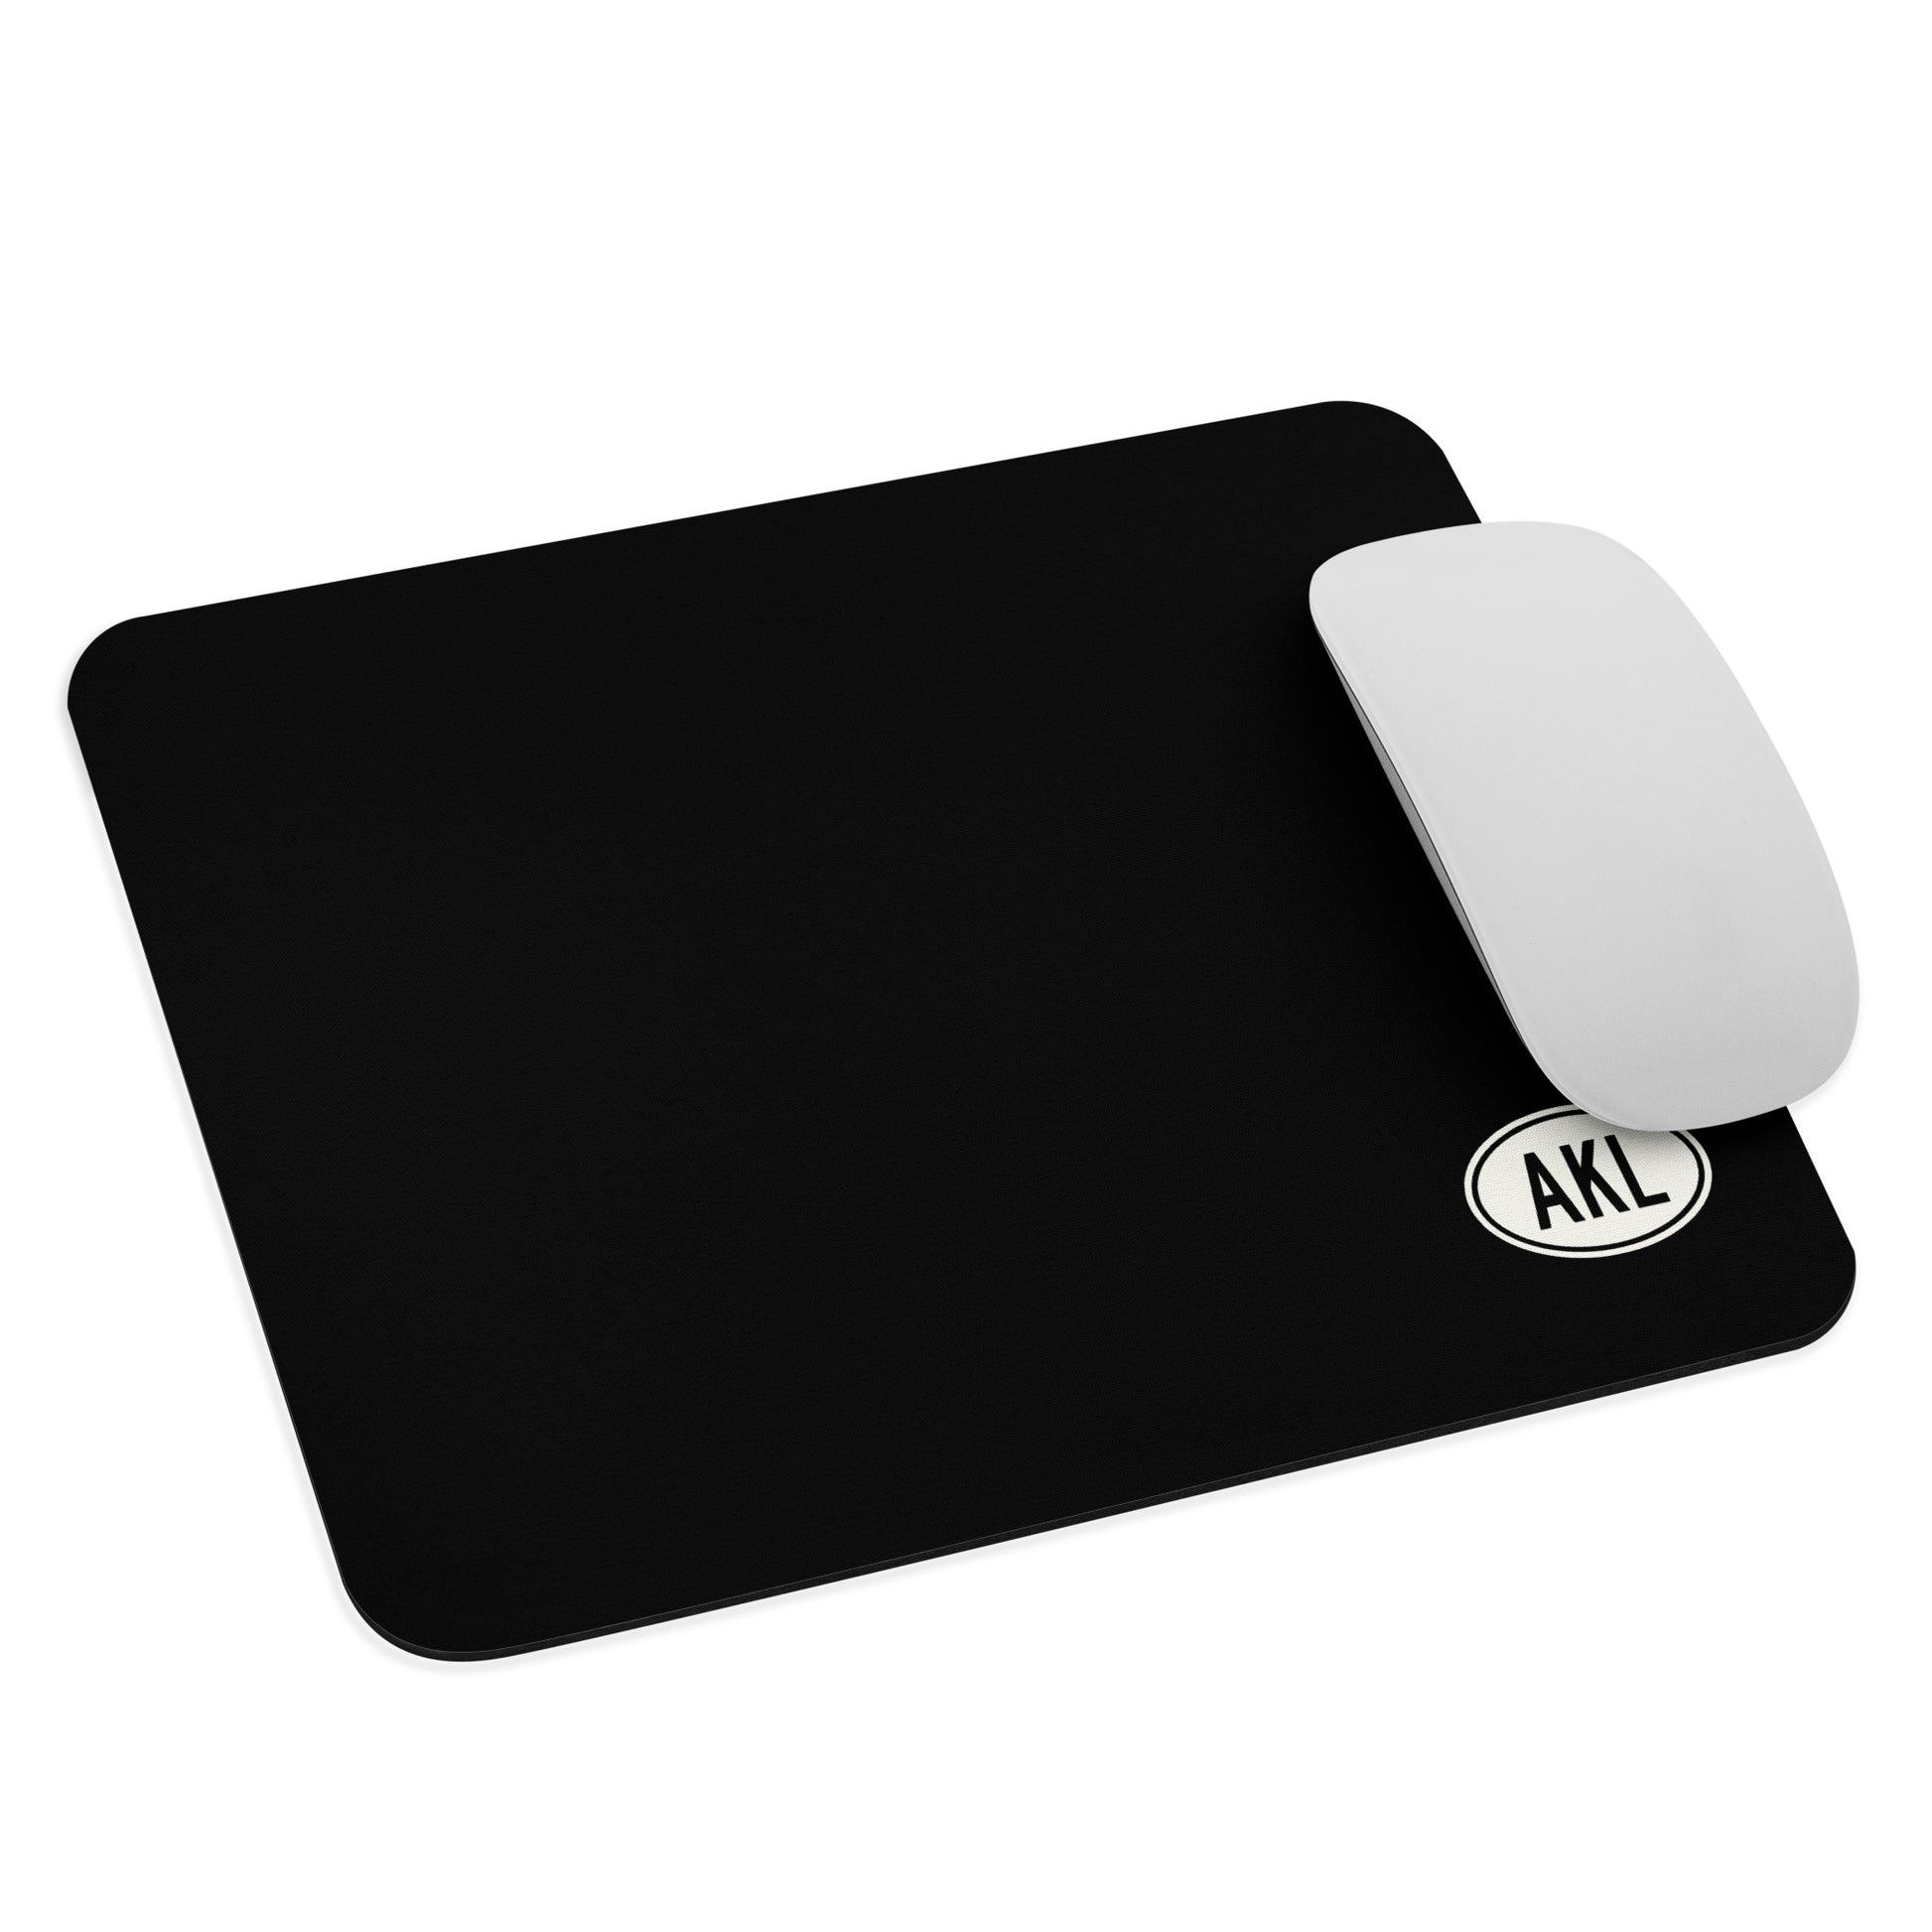 Unique Travel Gift Mouse Pad - White Oval • AKL Auckland • YHM Designs - Image 03